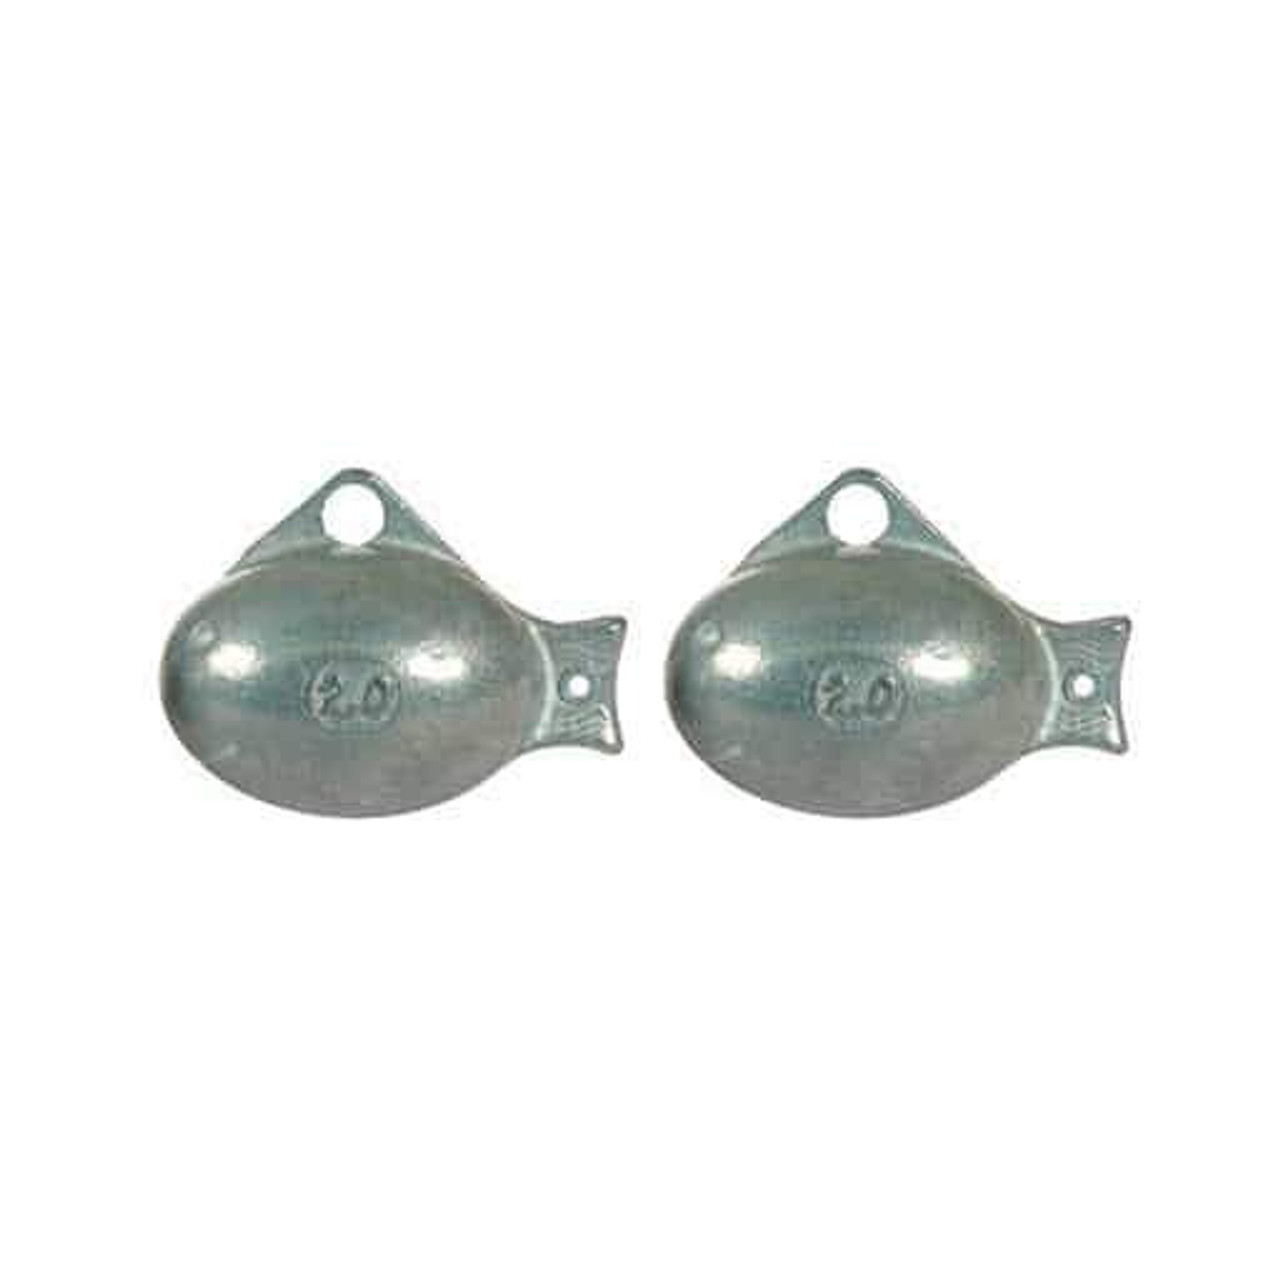 Off Shore Tackle Replacement Guppy Weights | 3/4 oz. | FishUSA